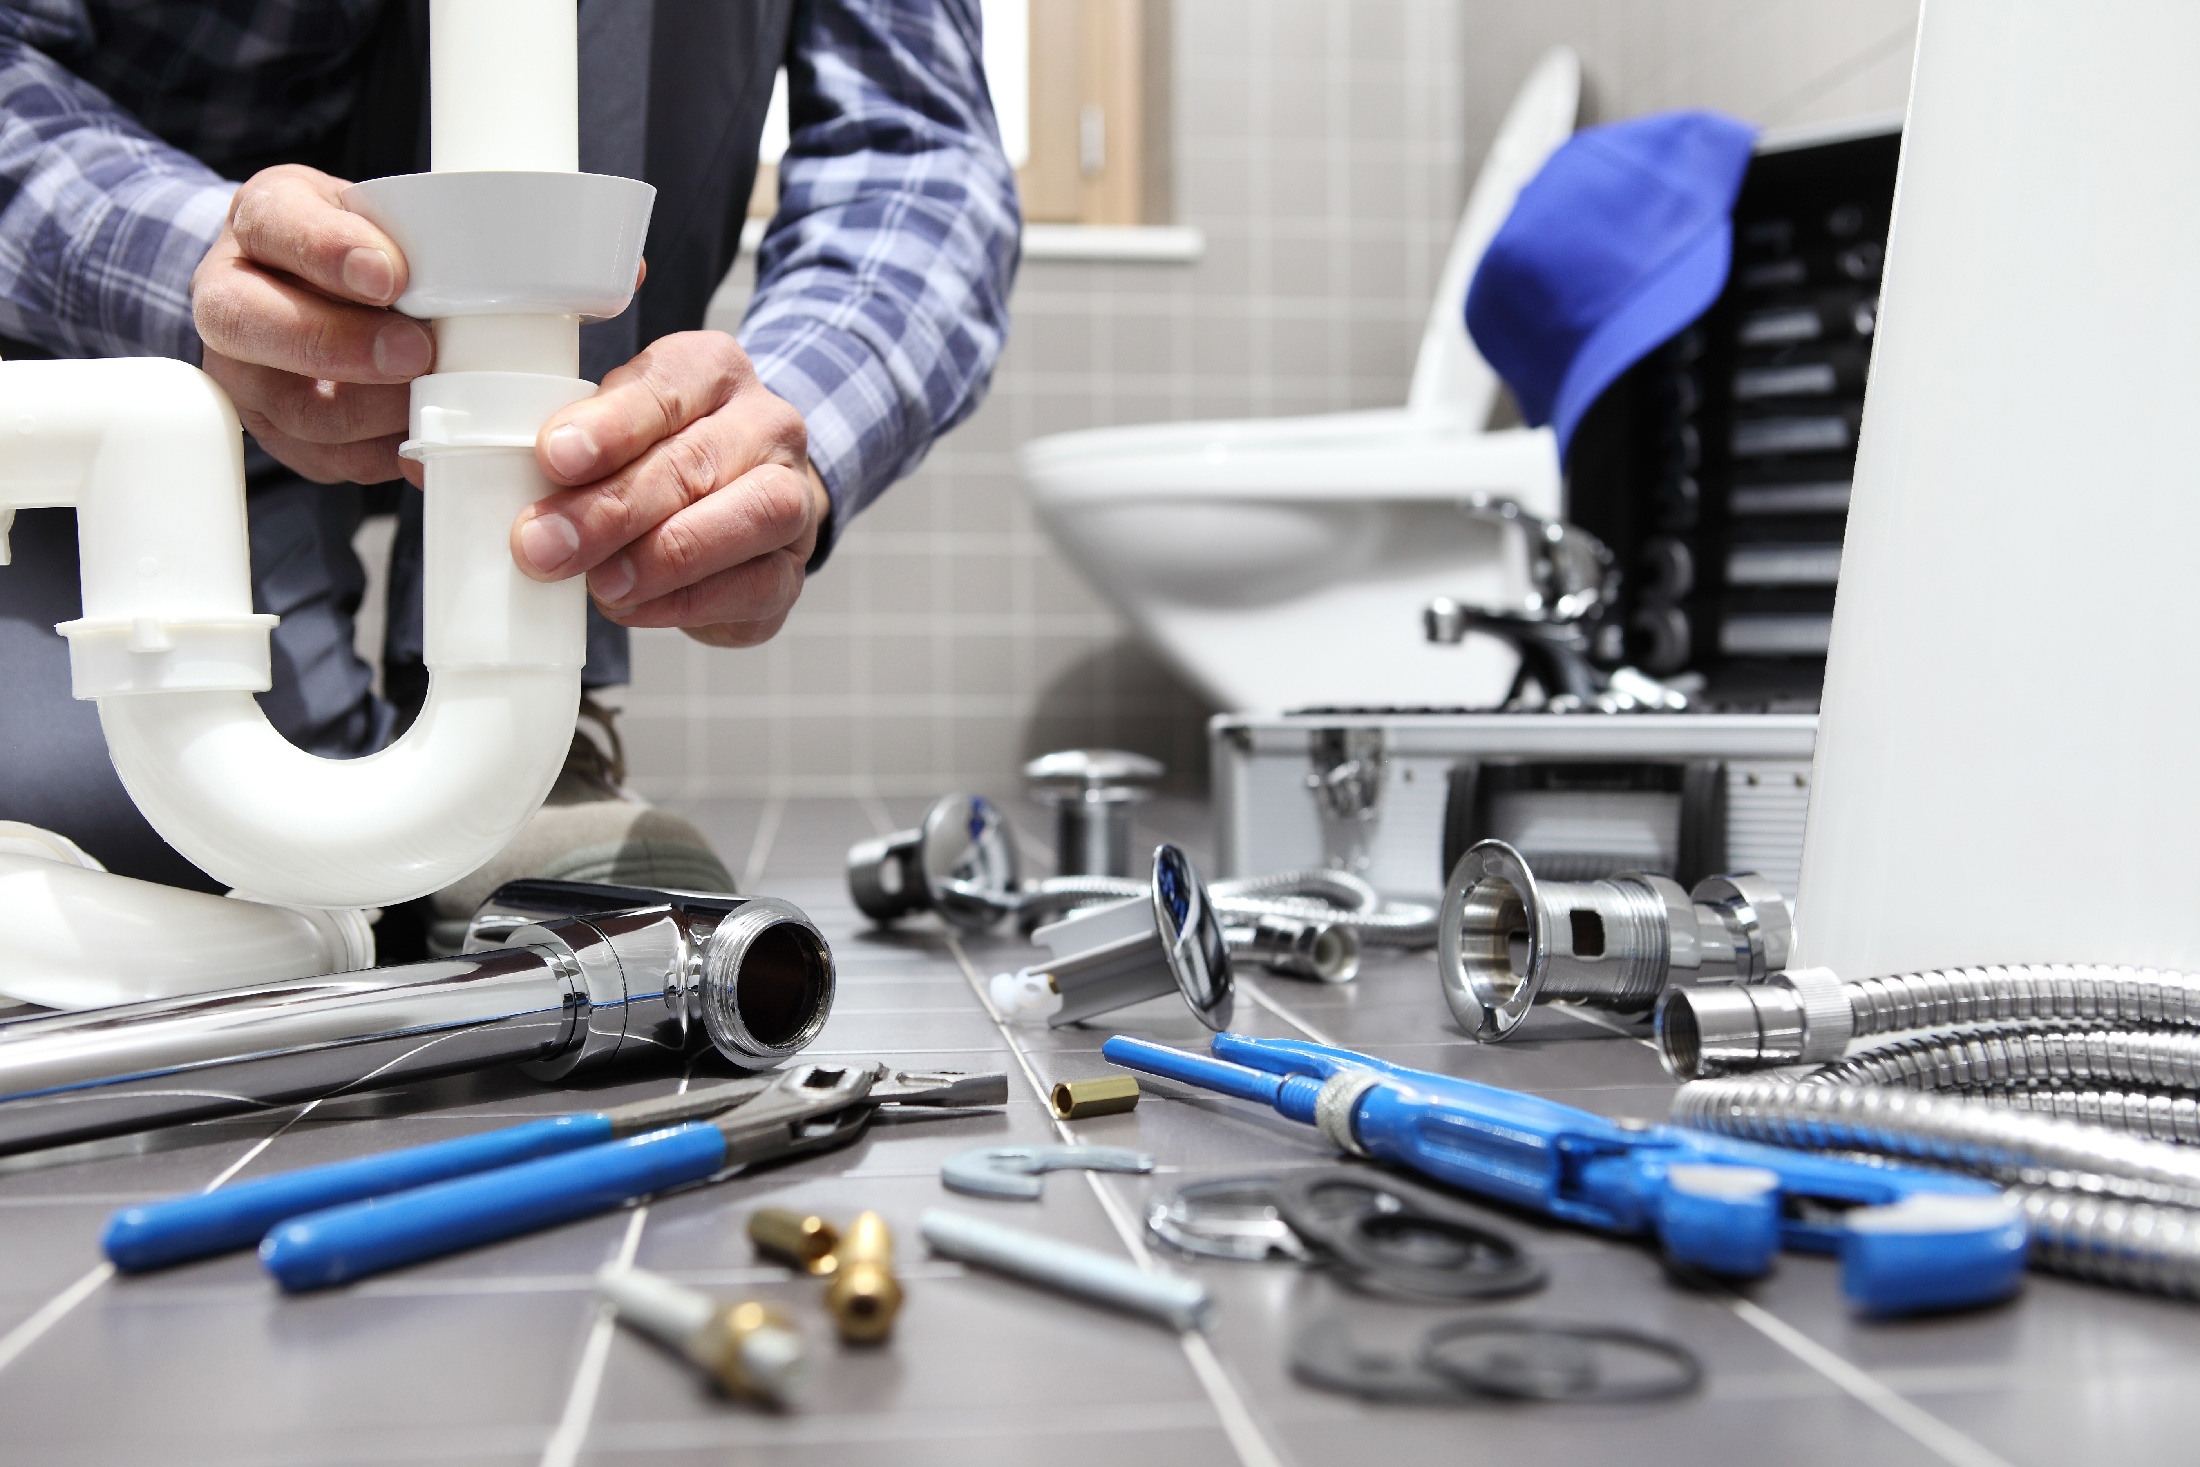 5 Easy Plumbing Tips for Homeowners